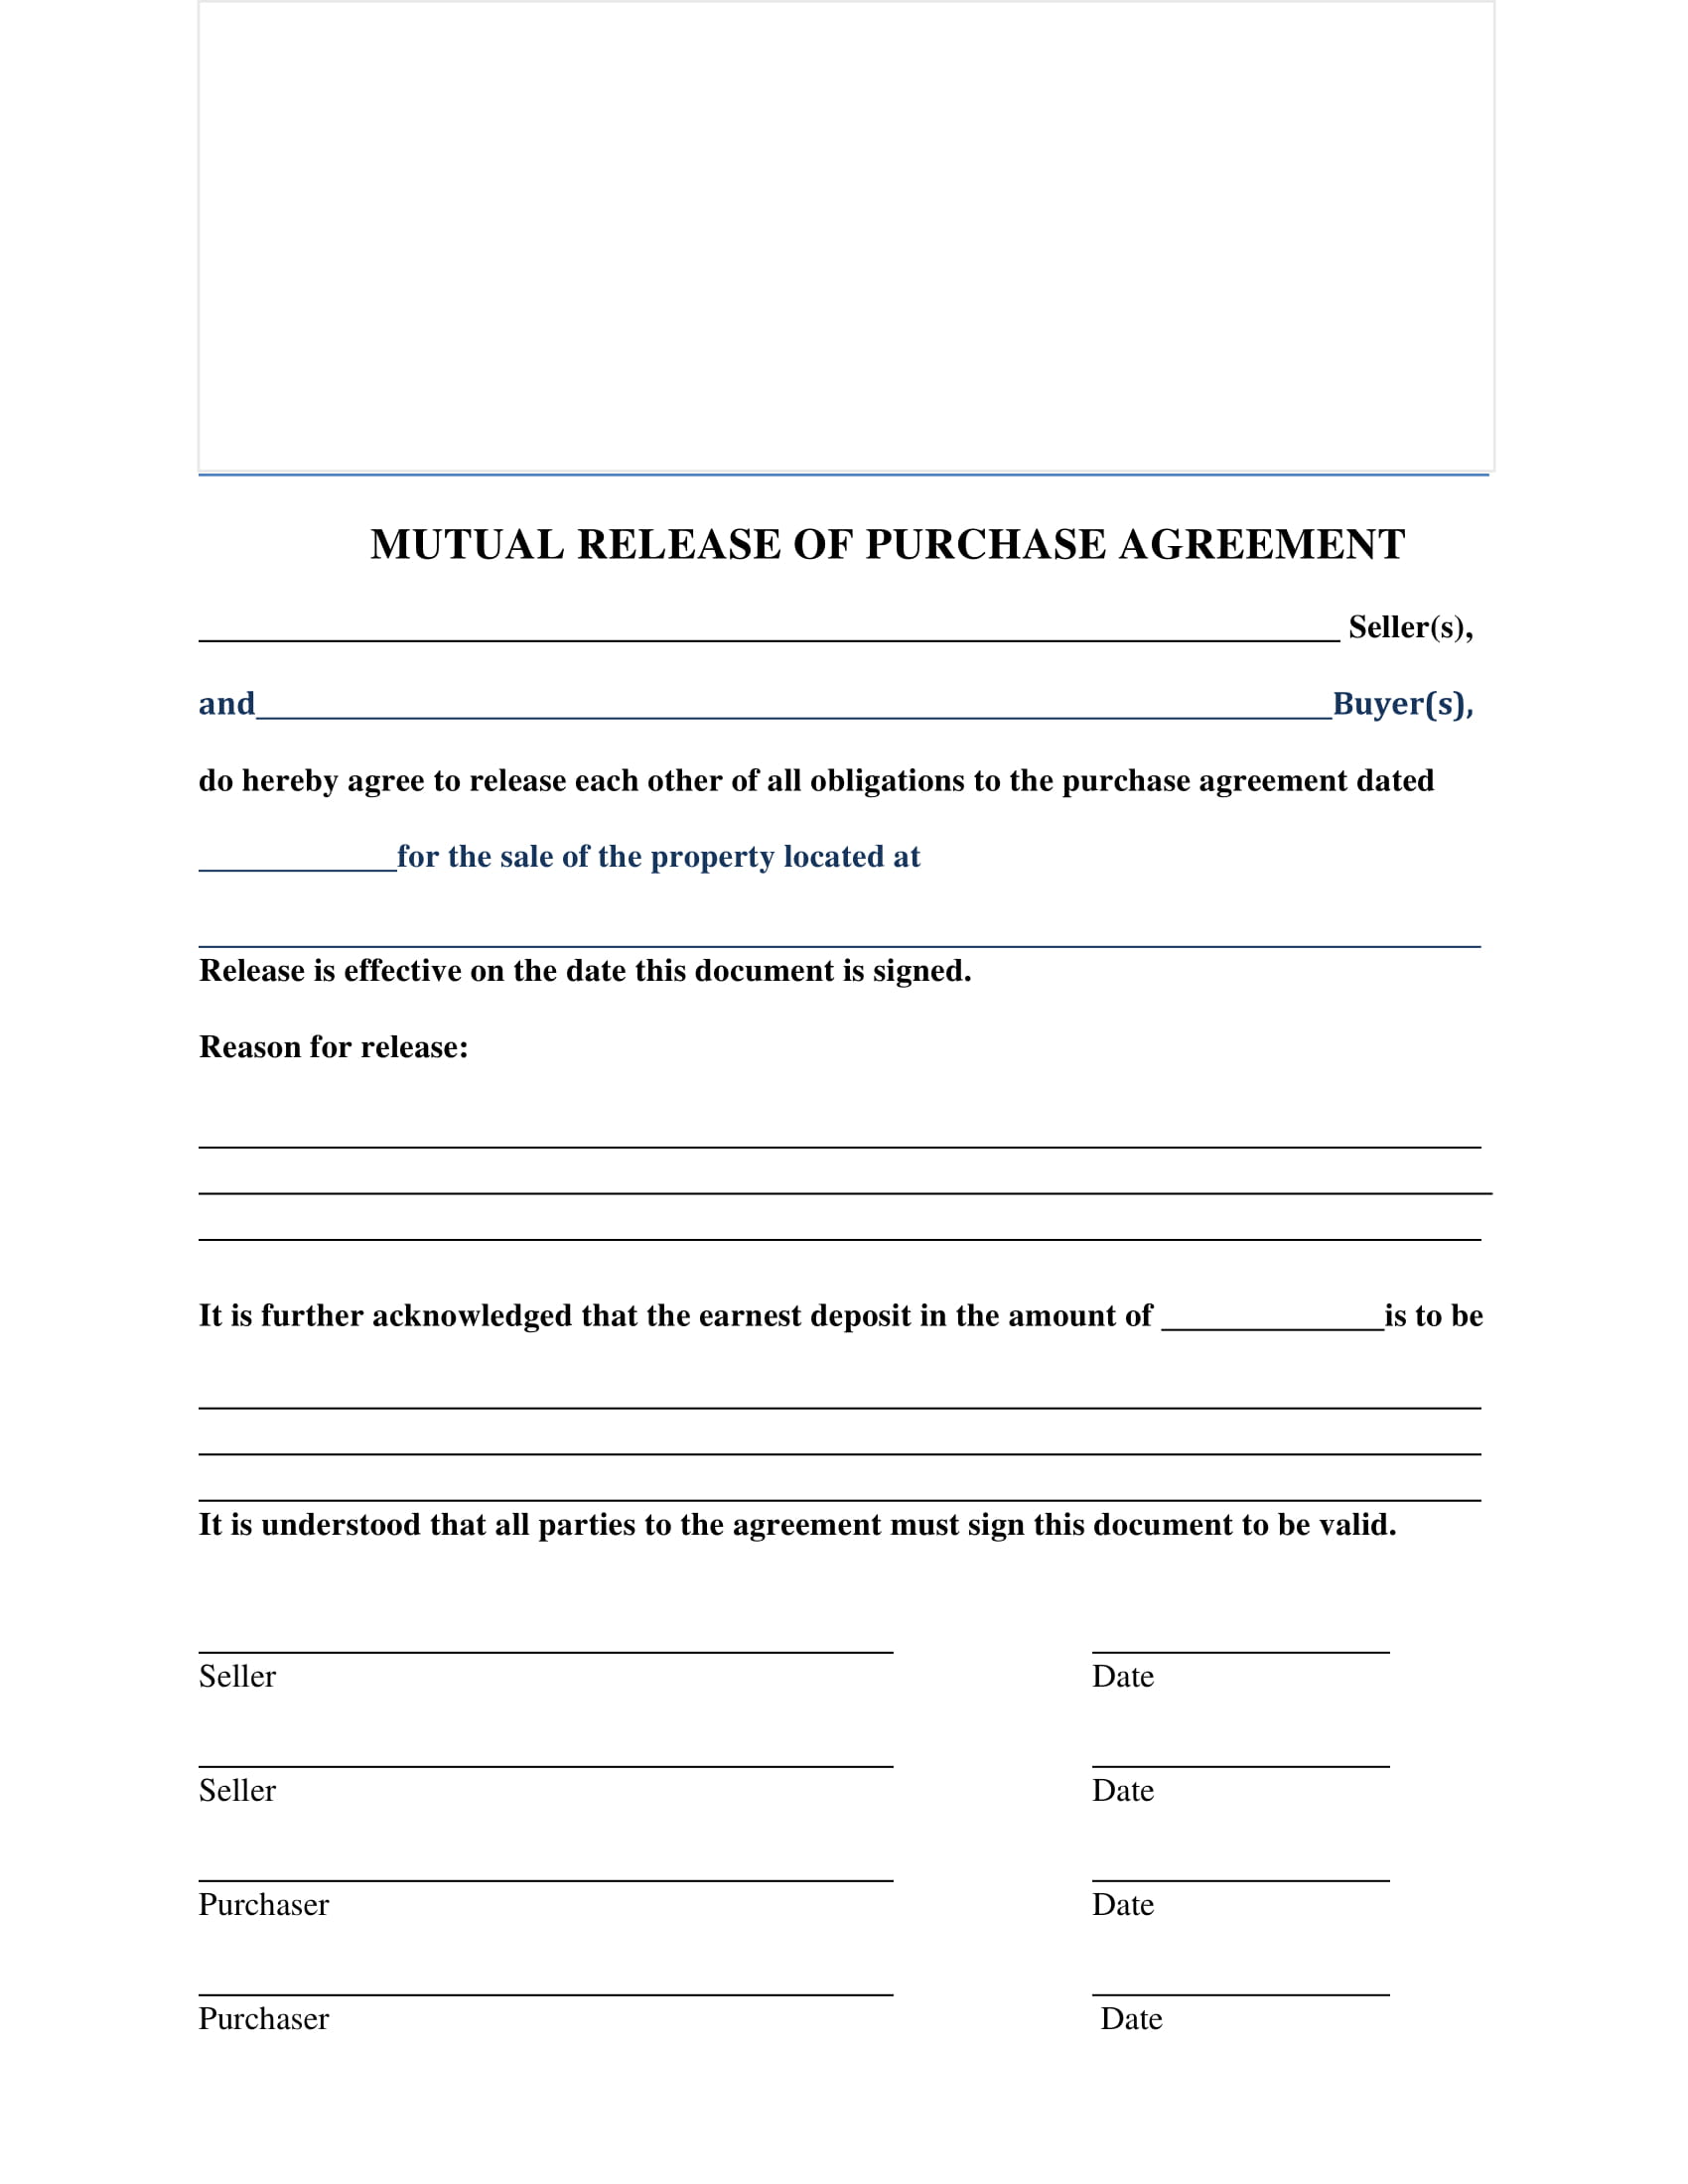 mutual release of purchase agreement contract form 1